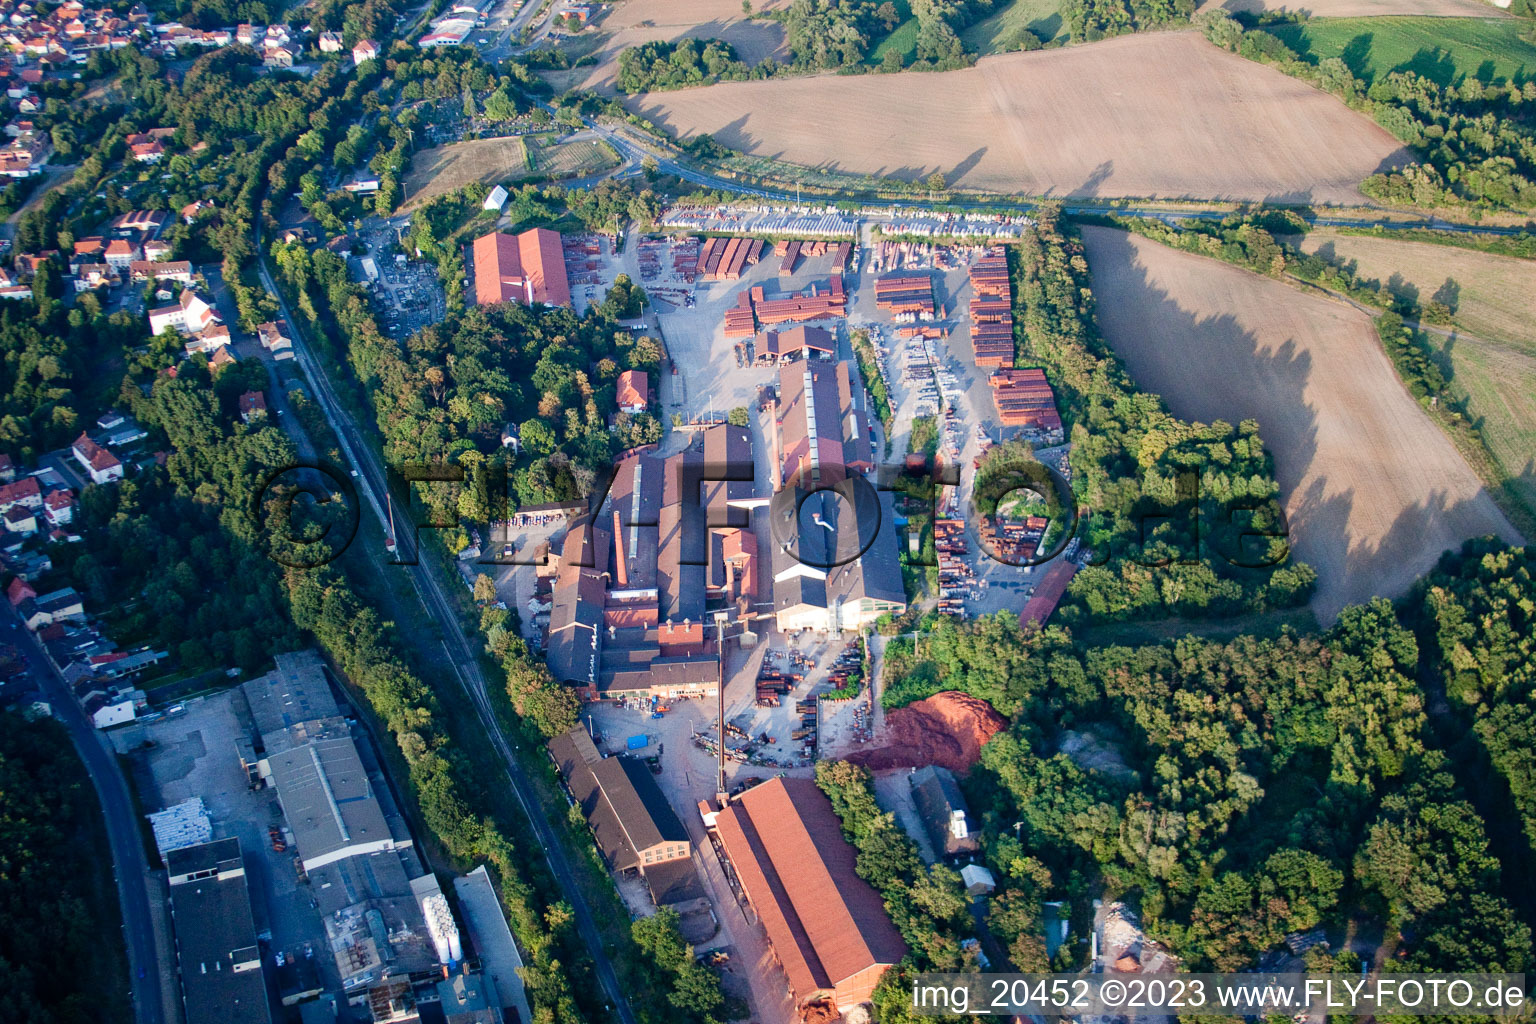 Aerial view of F.v. Müller roof tile works in Eisenberg in the state Rhineland-Palatinate, Germany